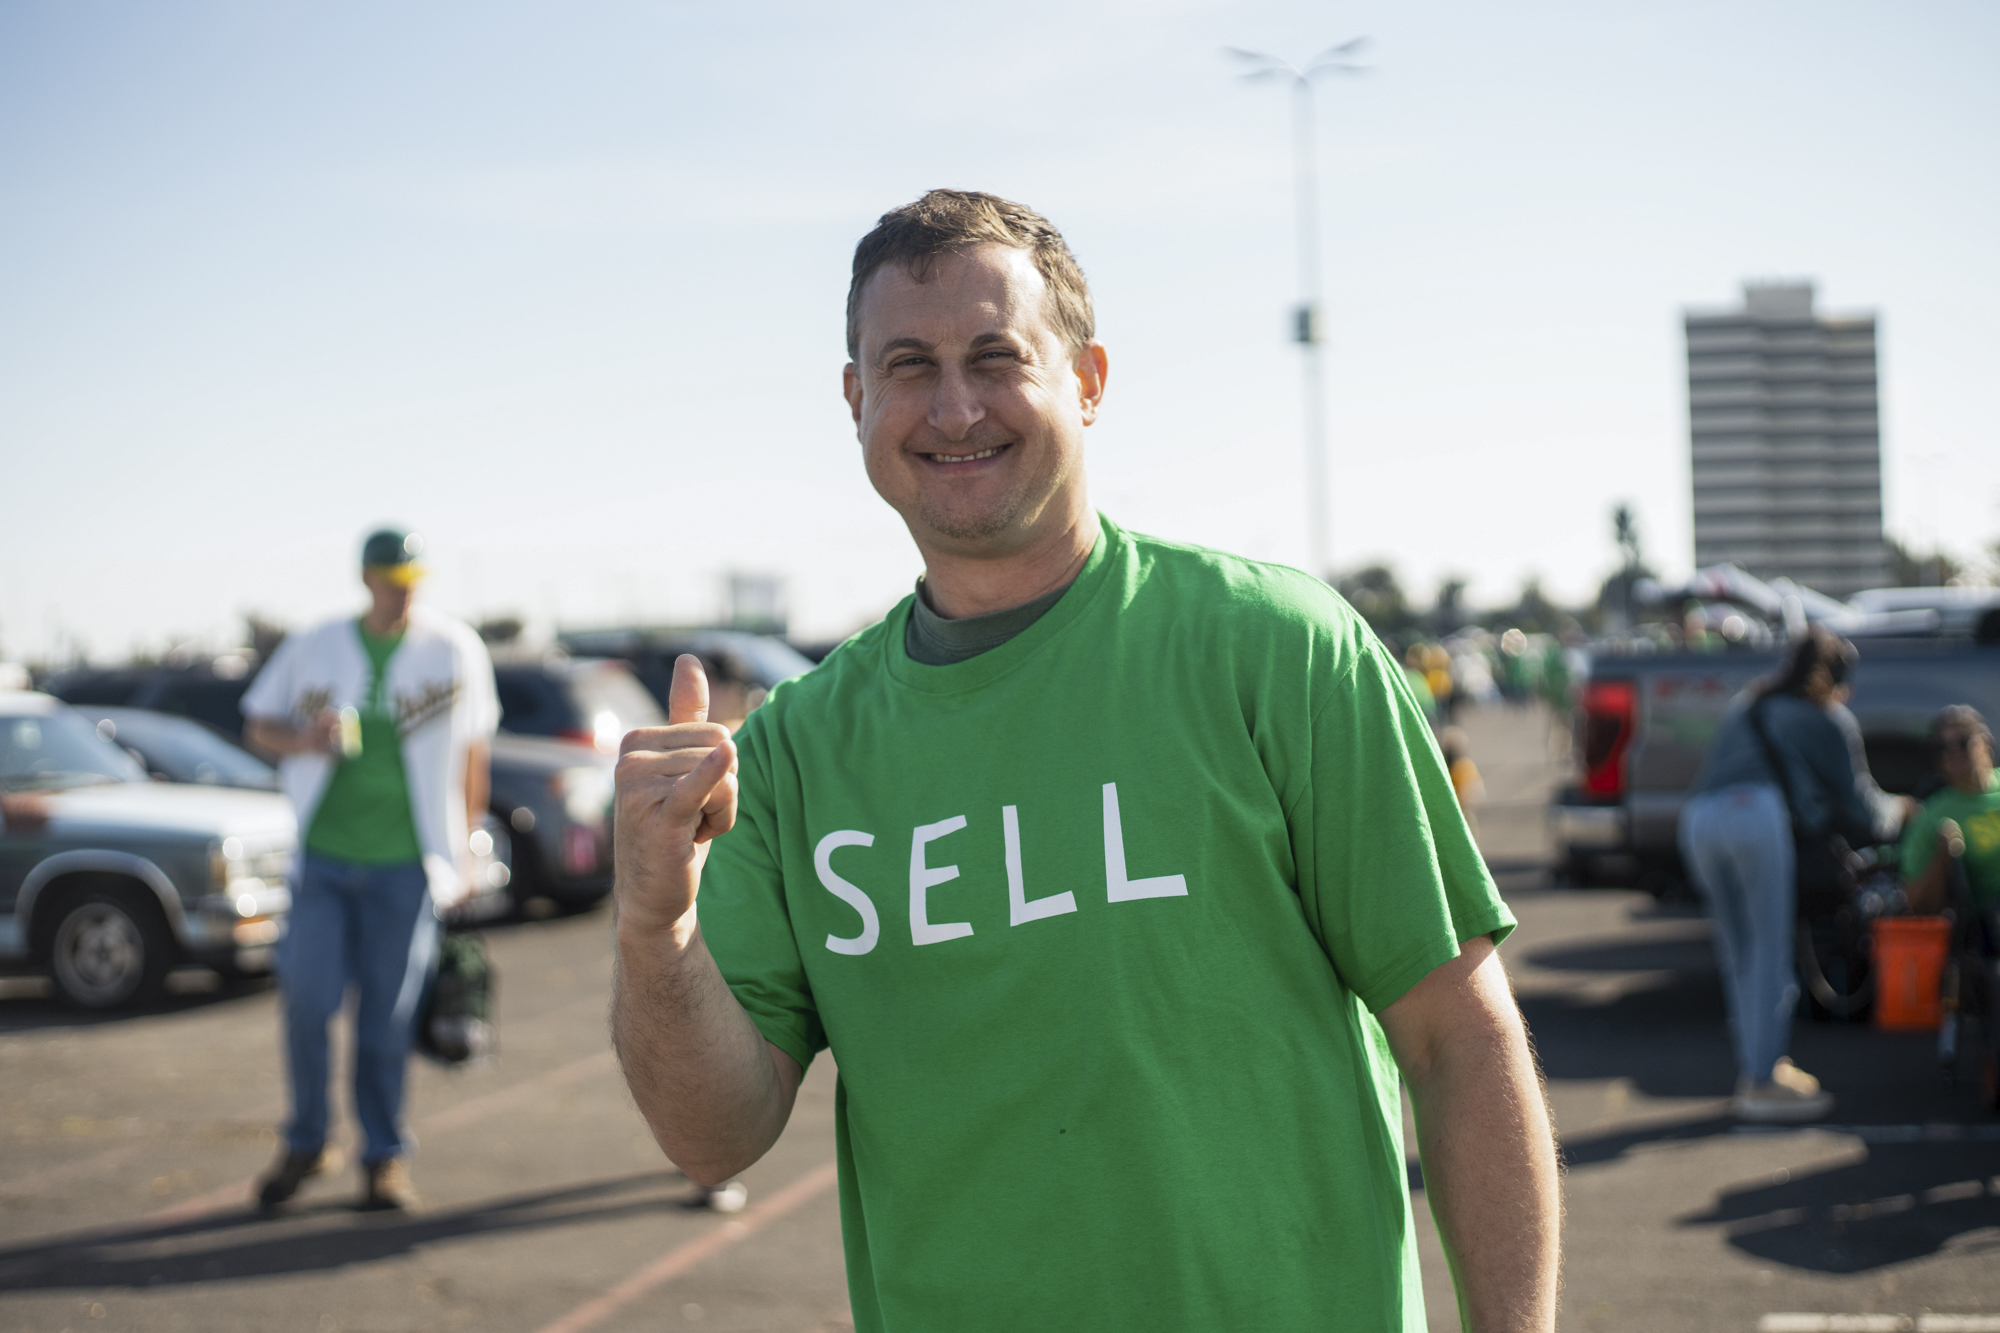 A man in a lime green shirt that reads "sell" points and smiles at the camera while standing in a parking lot.